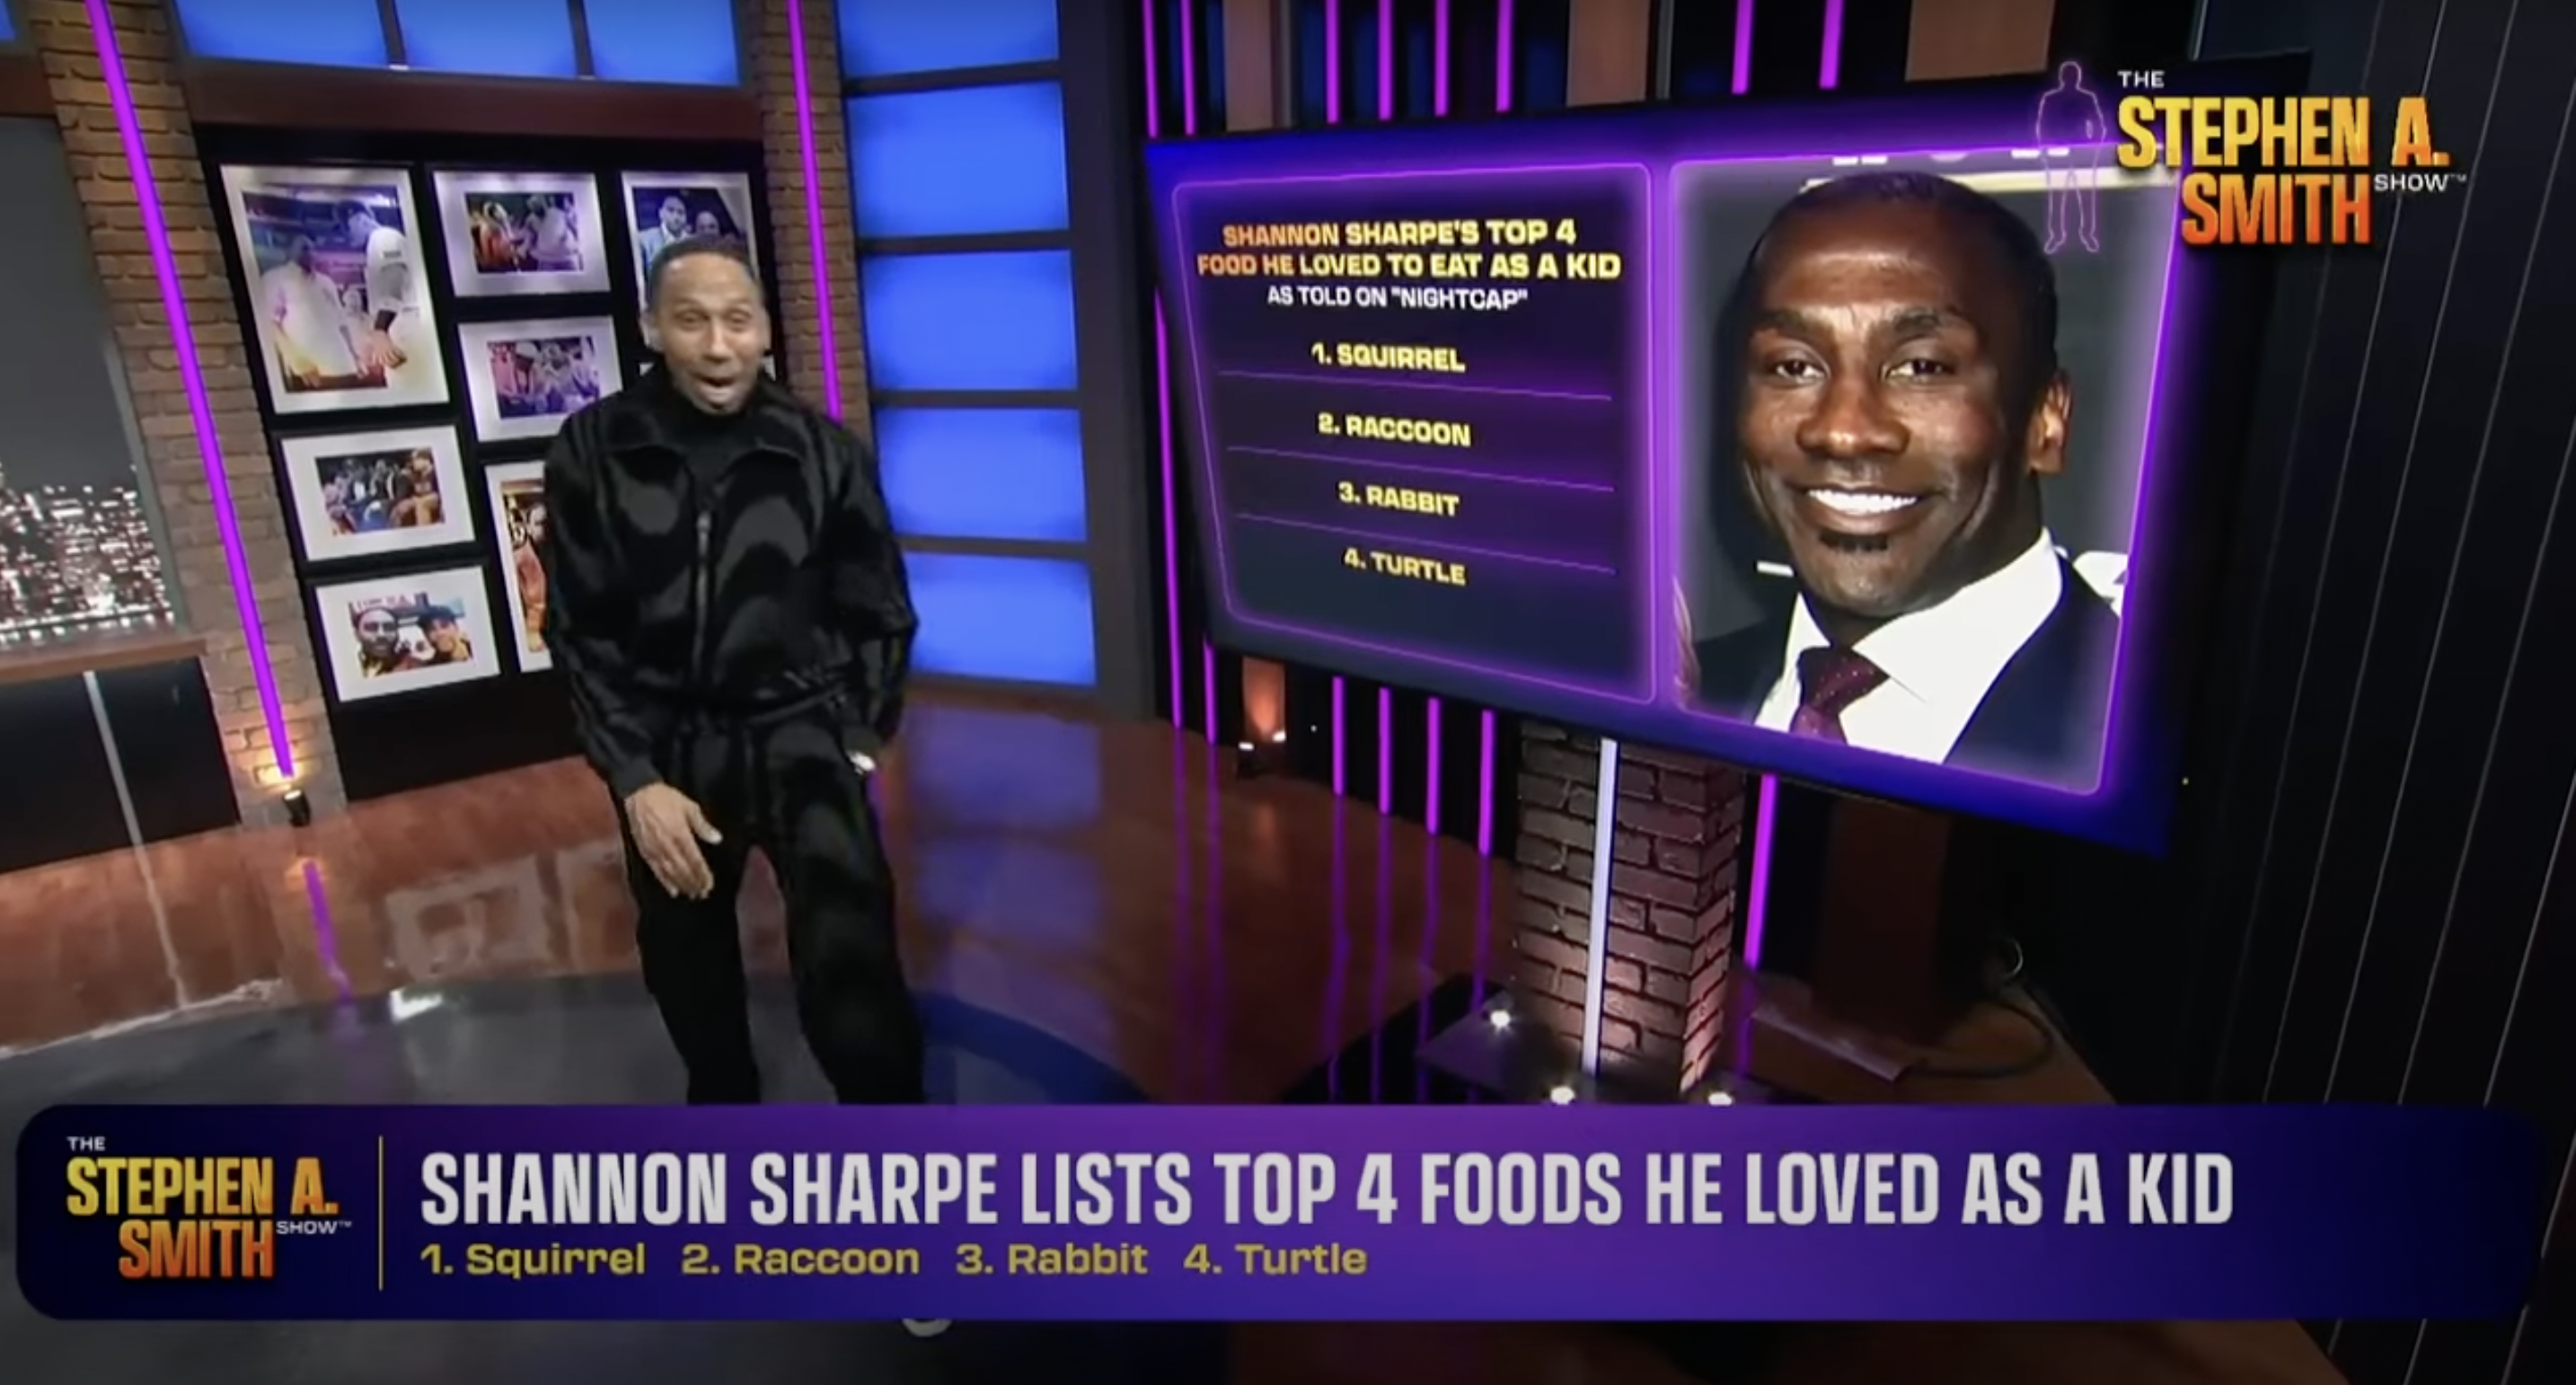 Stephen A. Smith discussing Shannon Sharpe's youth diet on his show.